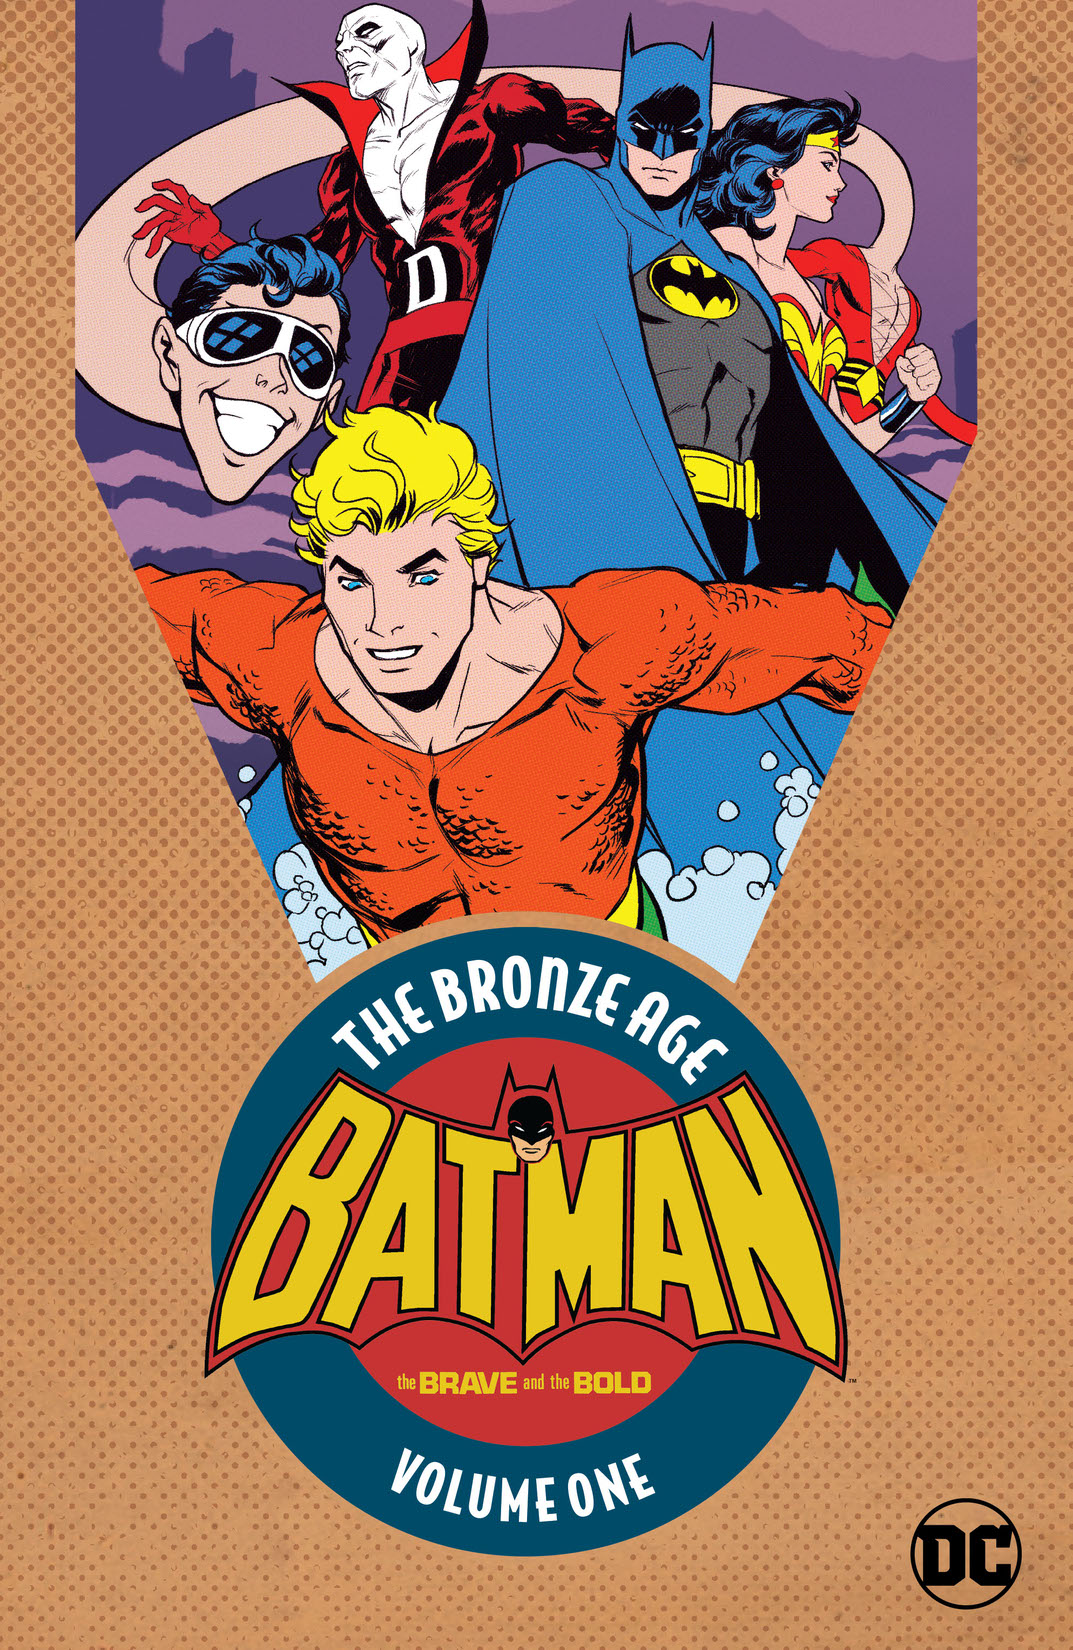 Batman in The Brave & the Bold: The Bronze Age Vol. 1 preview images